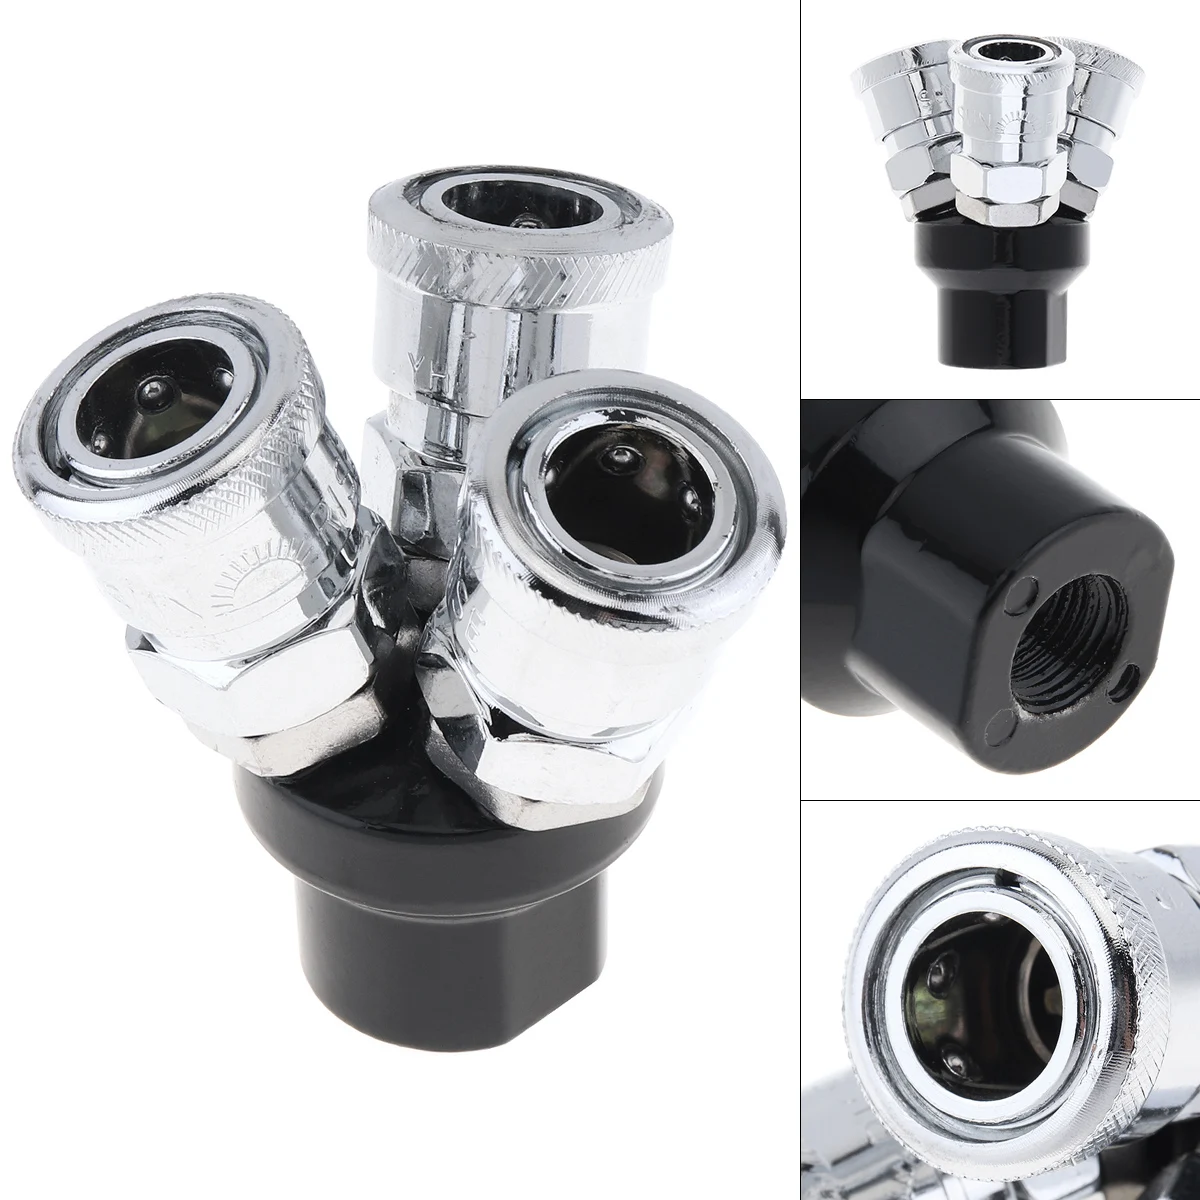 

Pneumatic Fittings Three Way 1/4" Air Hose Quick Connector with 14mm Thread Diameter and Telescopic Buckle for Air Compressors